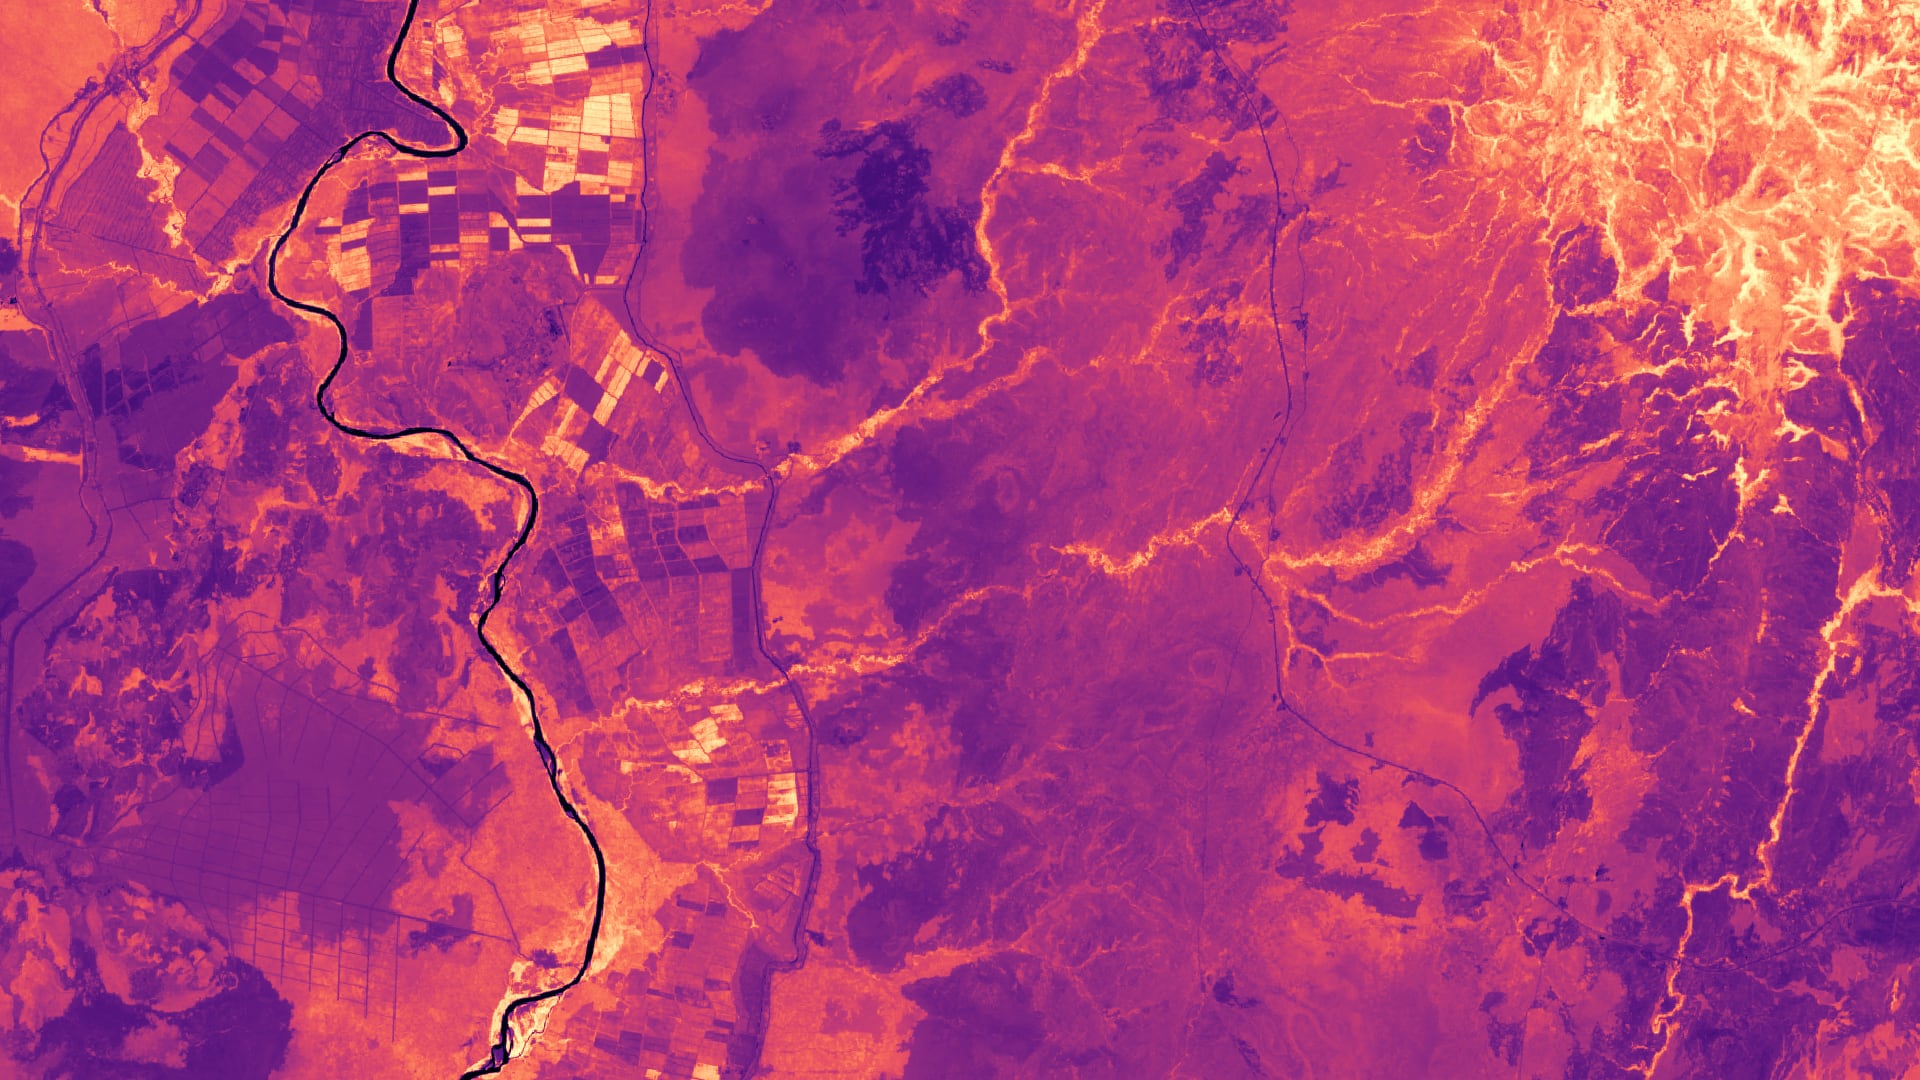 NDVI-processed Landsat 8 OLI data over the Lower Omo River Valley on January 11th, 2018. Lighter colors indicate areas with high vegetation greenness while darker colors indicate less green vegetation and water. This will help decision-makers understand where agricultural areas are located in comparison to uncultivated lands.  Keywords: remote sensing, Landsat, Normalized Difference Vegetation Index, Tasseled Cap, agro-business, land cover change